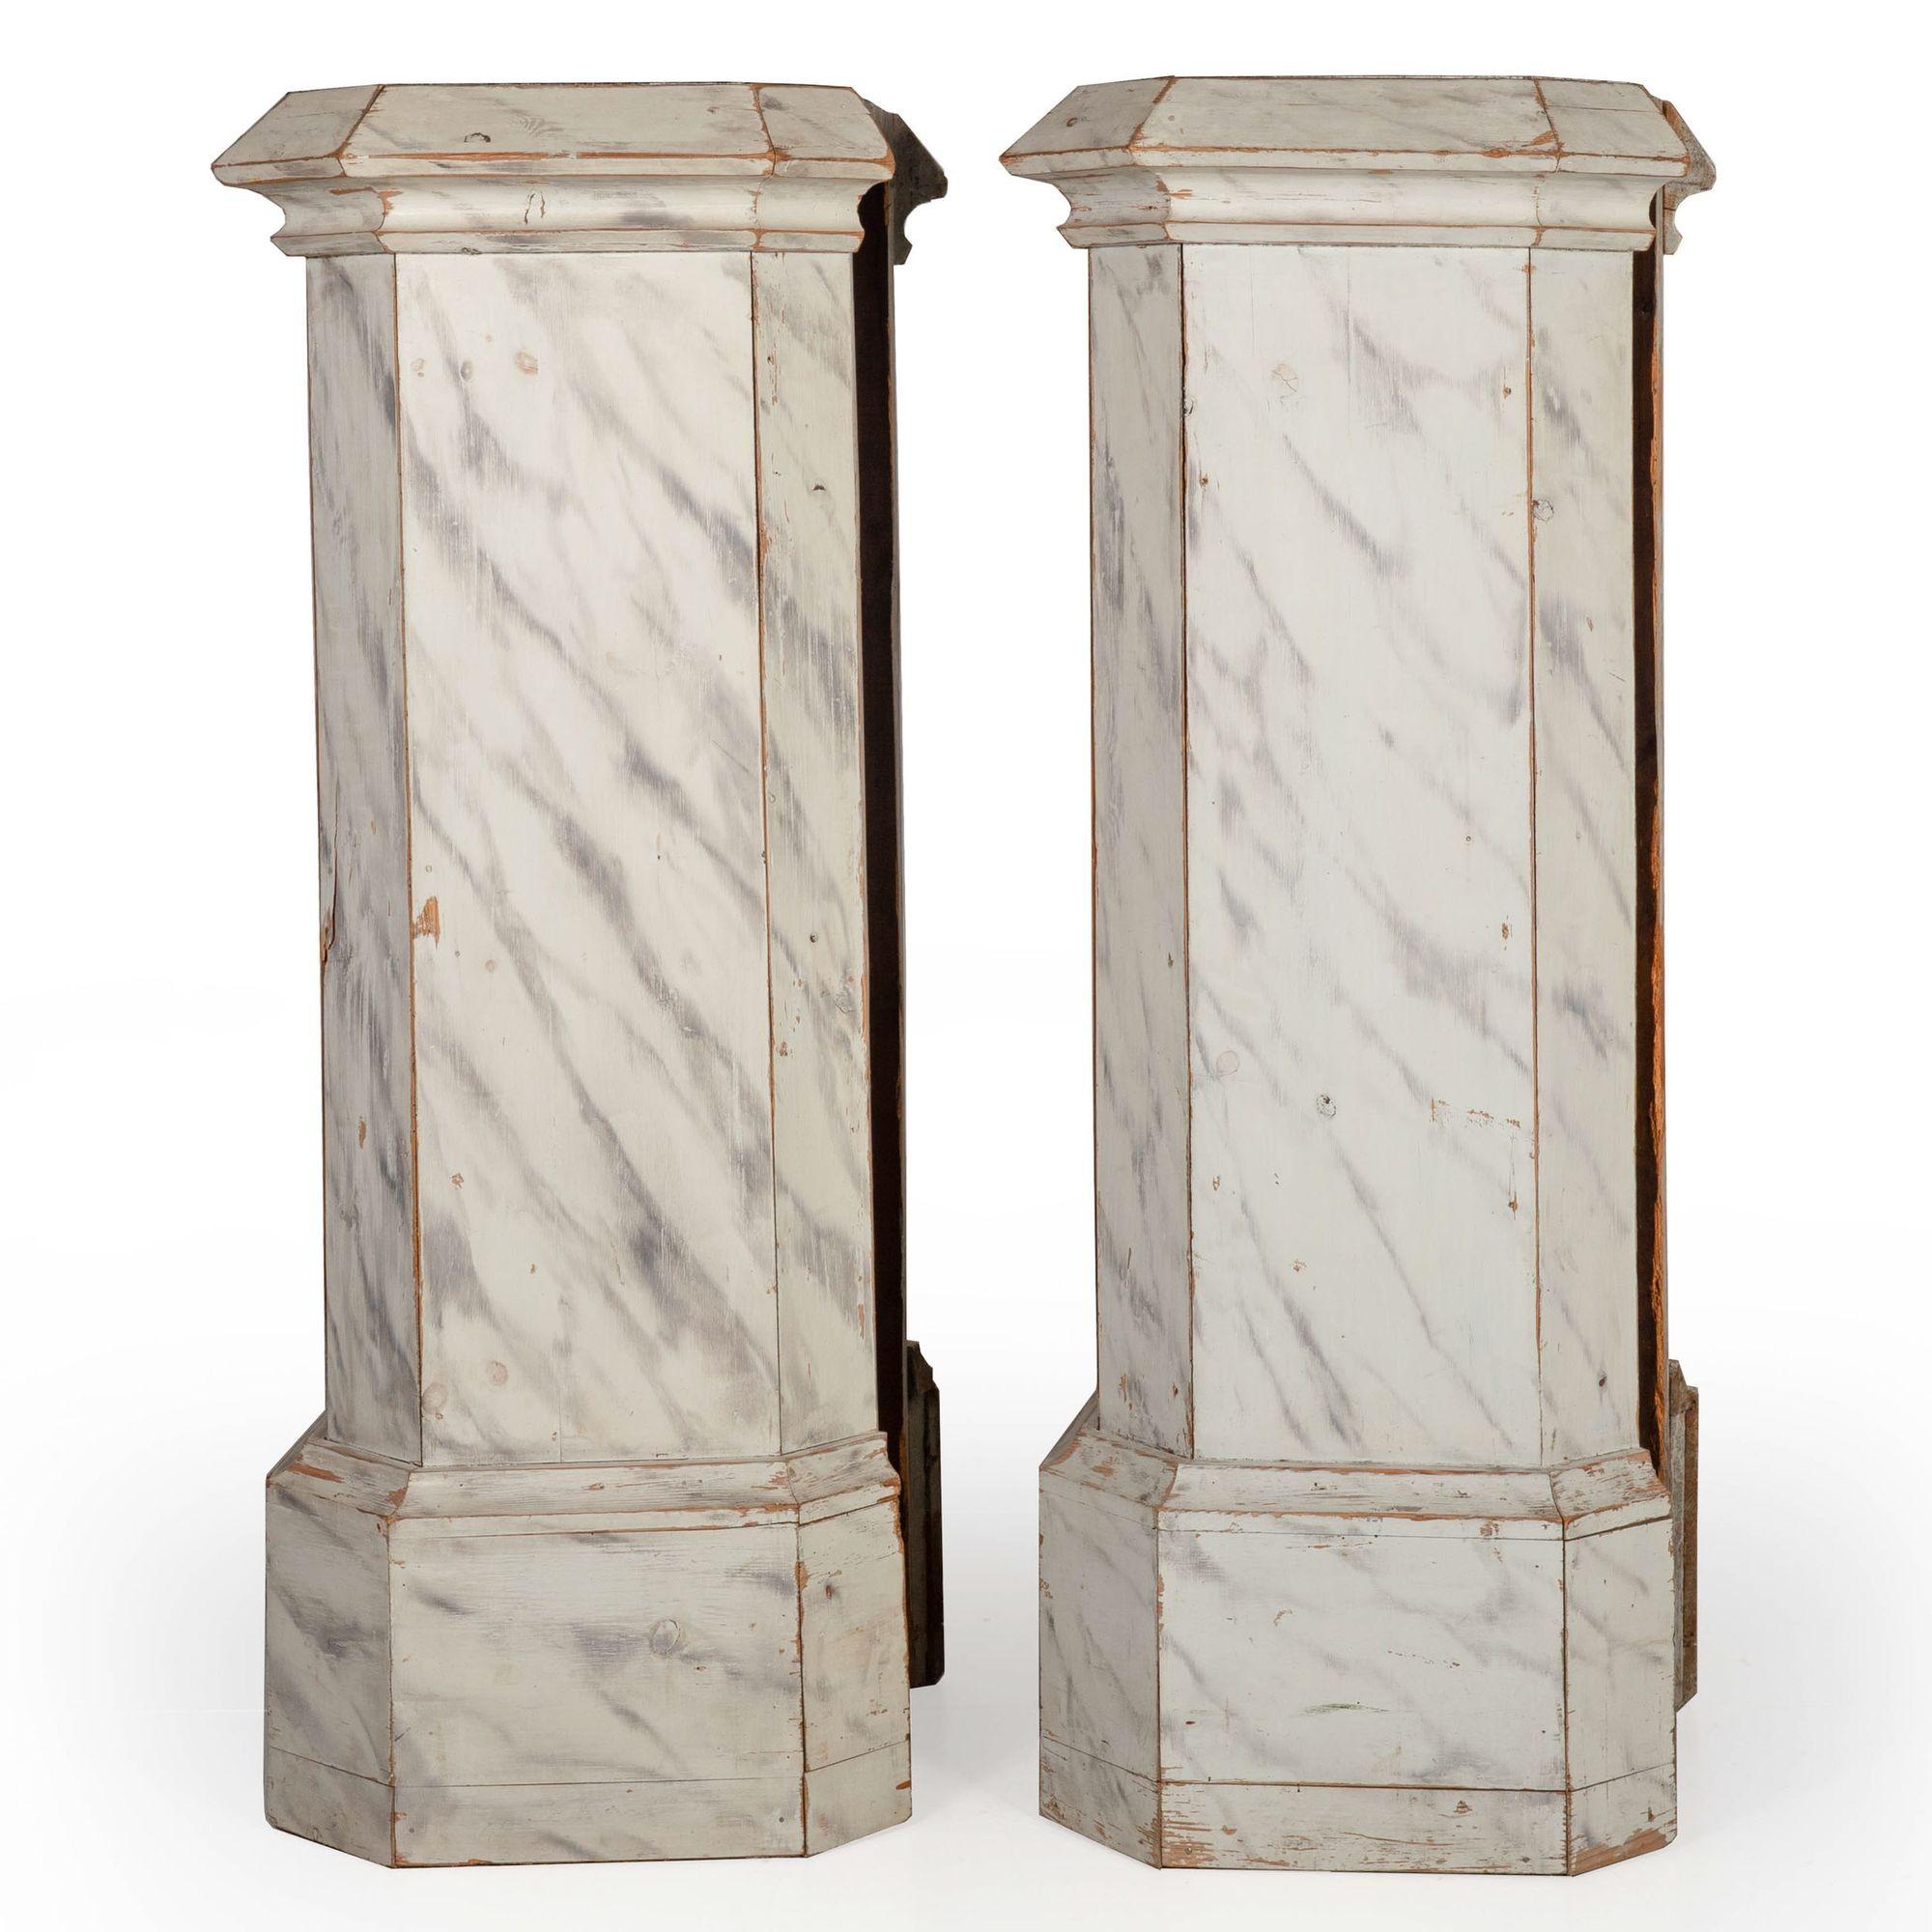 PAIR OF FAUX MARBLE PAINTED PINE COLUMNS IN ORIGINAL PAINT
Probably English, circa first quarter of the 20th century
Item # 403DWS18A

A great pair of substantial columns, they are executed in pine that has been painted in whites and grays to create